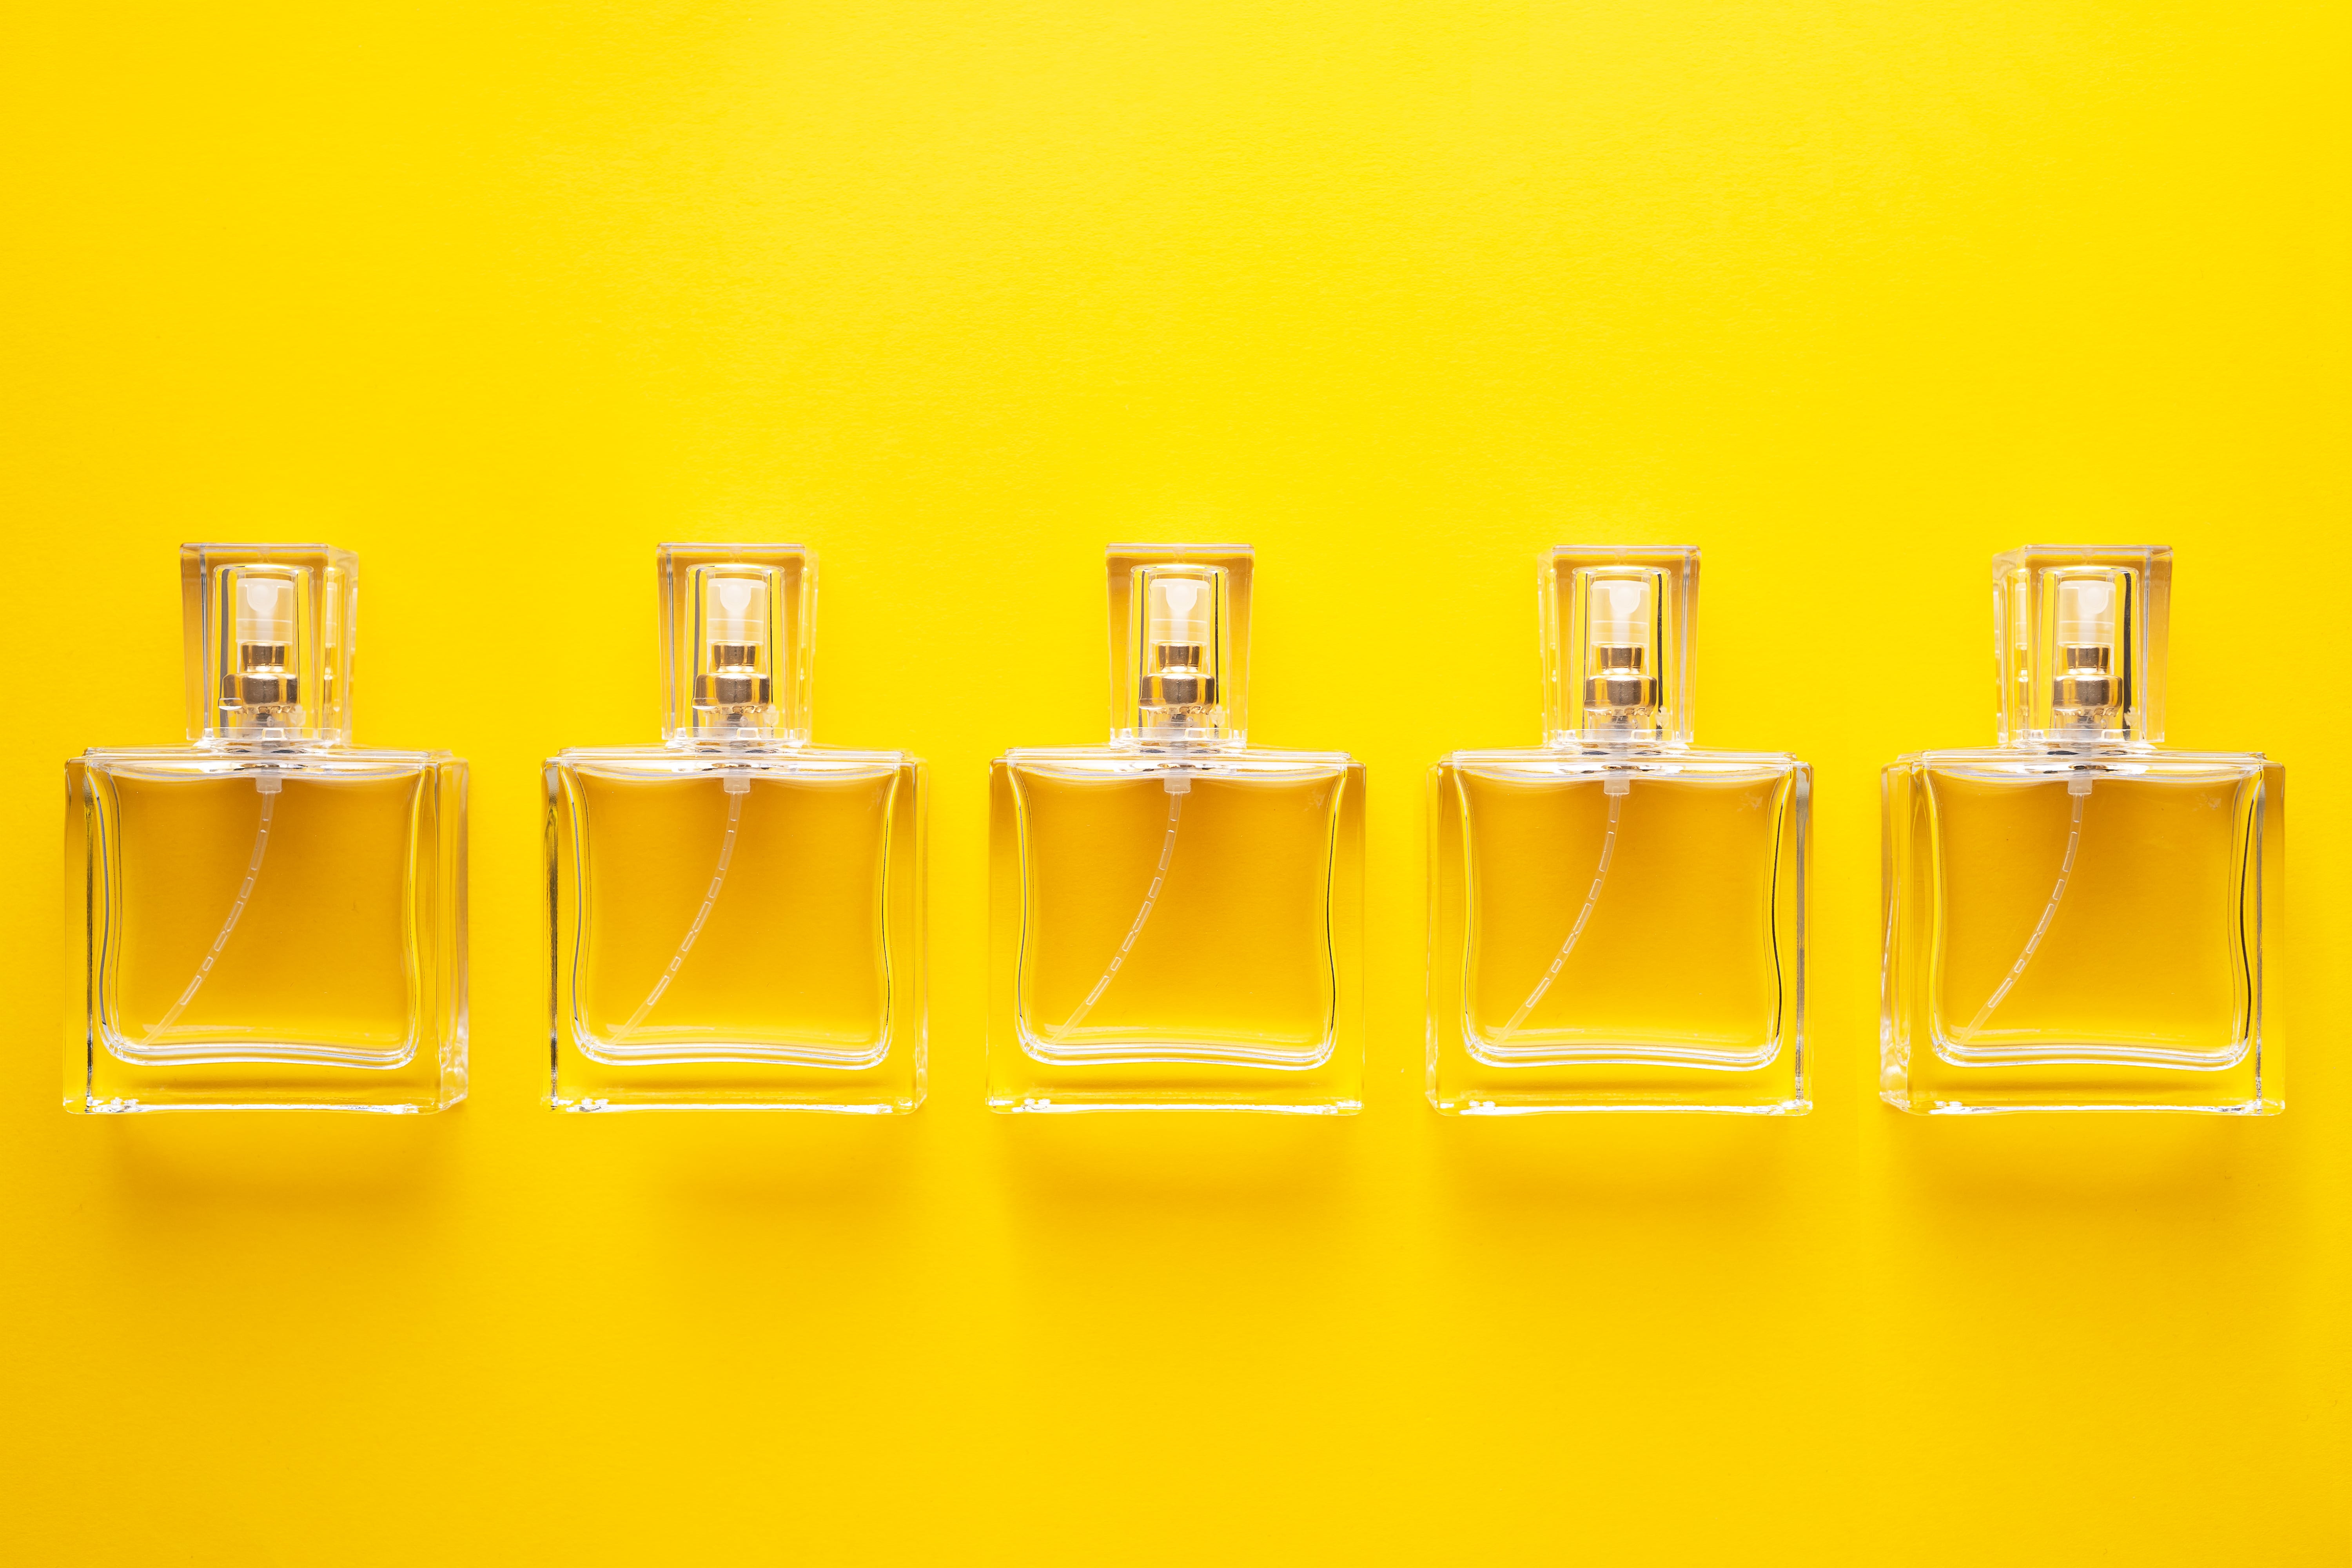 Why Do We Love the Smell of Perfume?